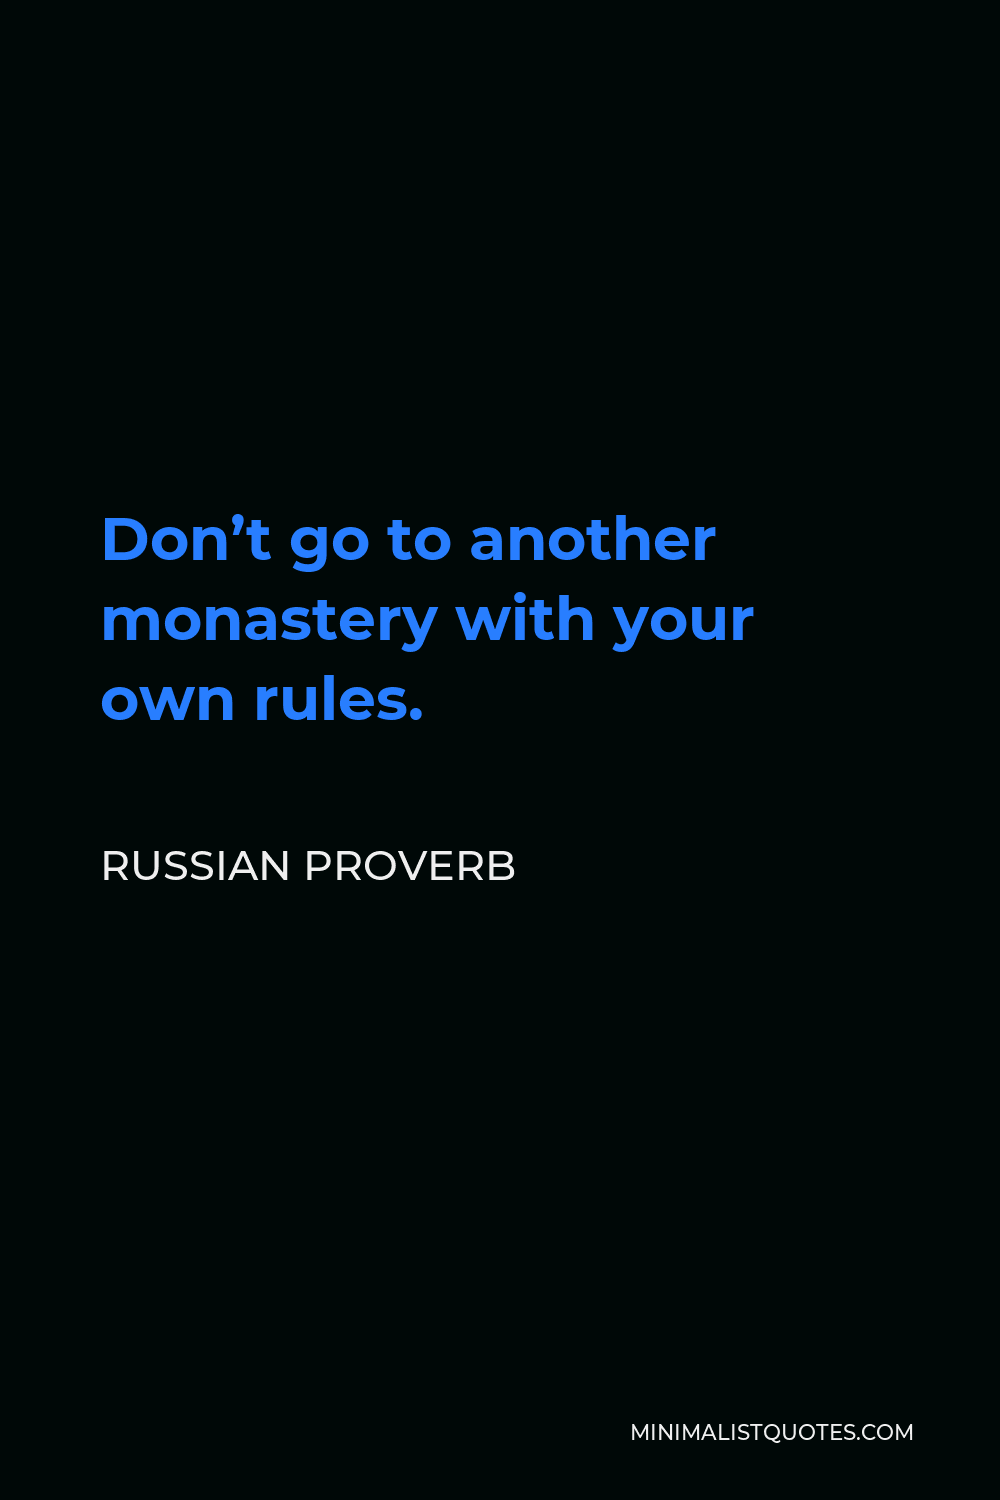 Russian Proverb Quote - Don’t go to another monastery with your own rules.